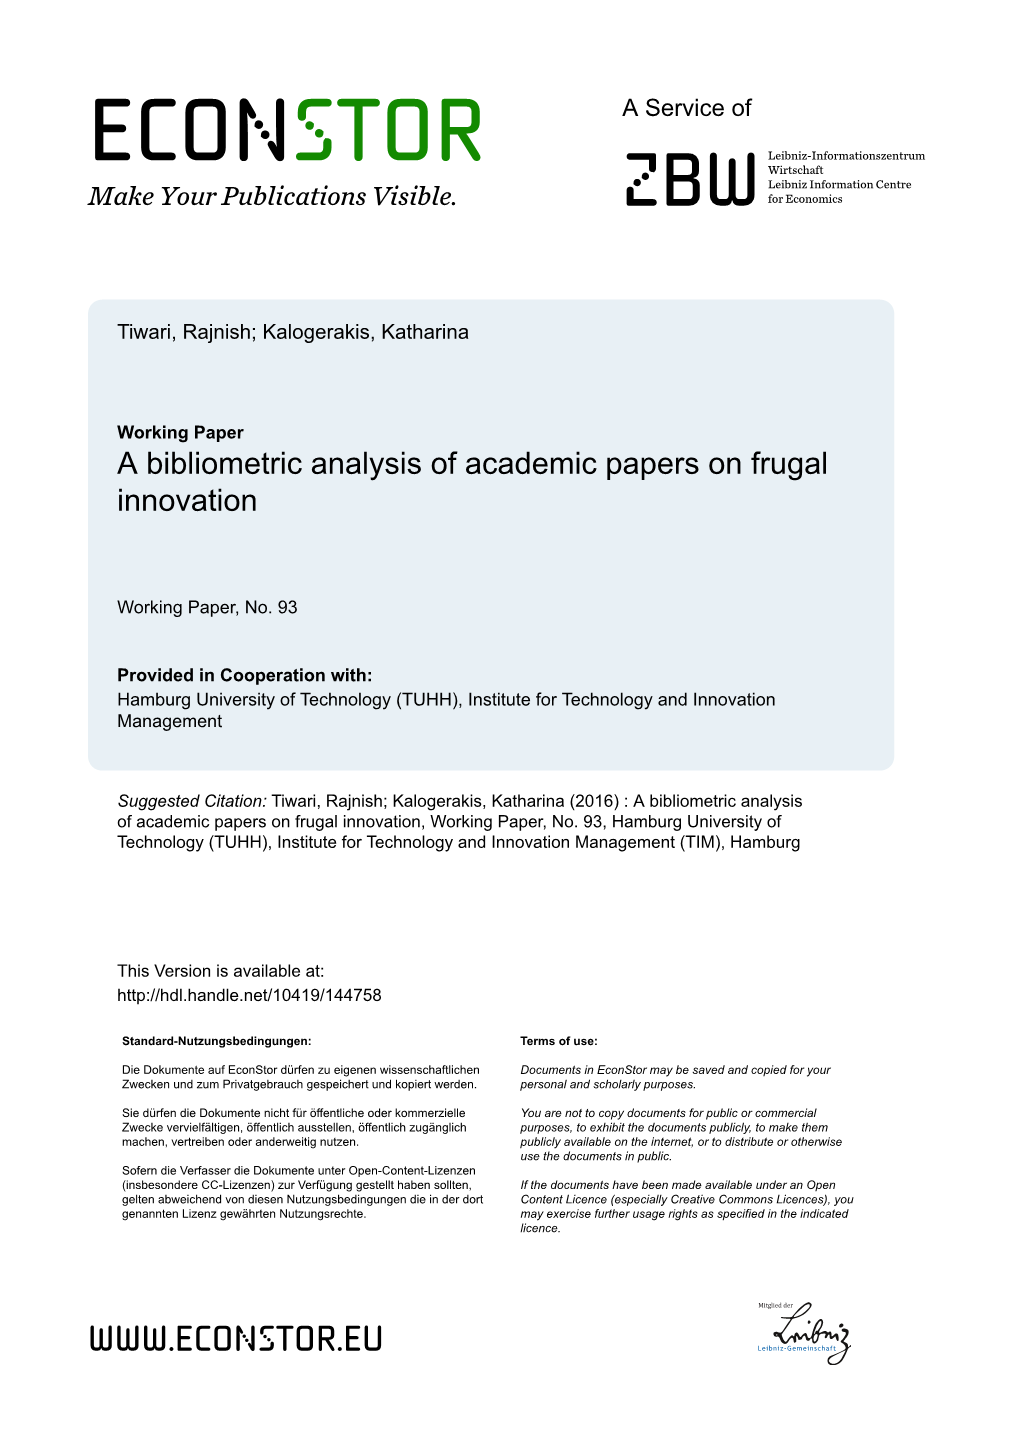 A Bibliometric Analysis of Academic Papers on Frugal Innovation